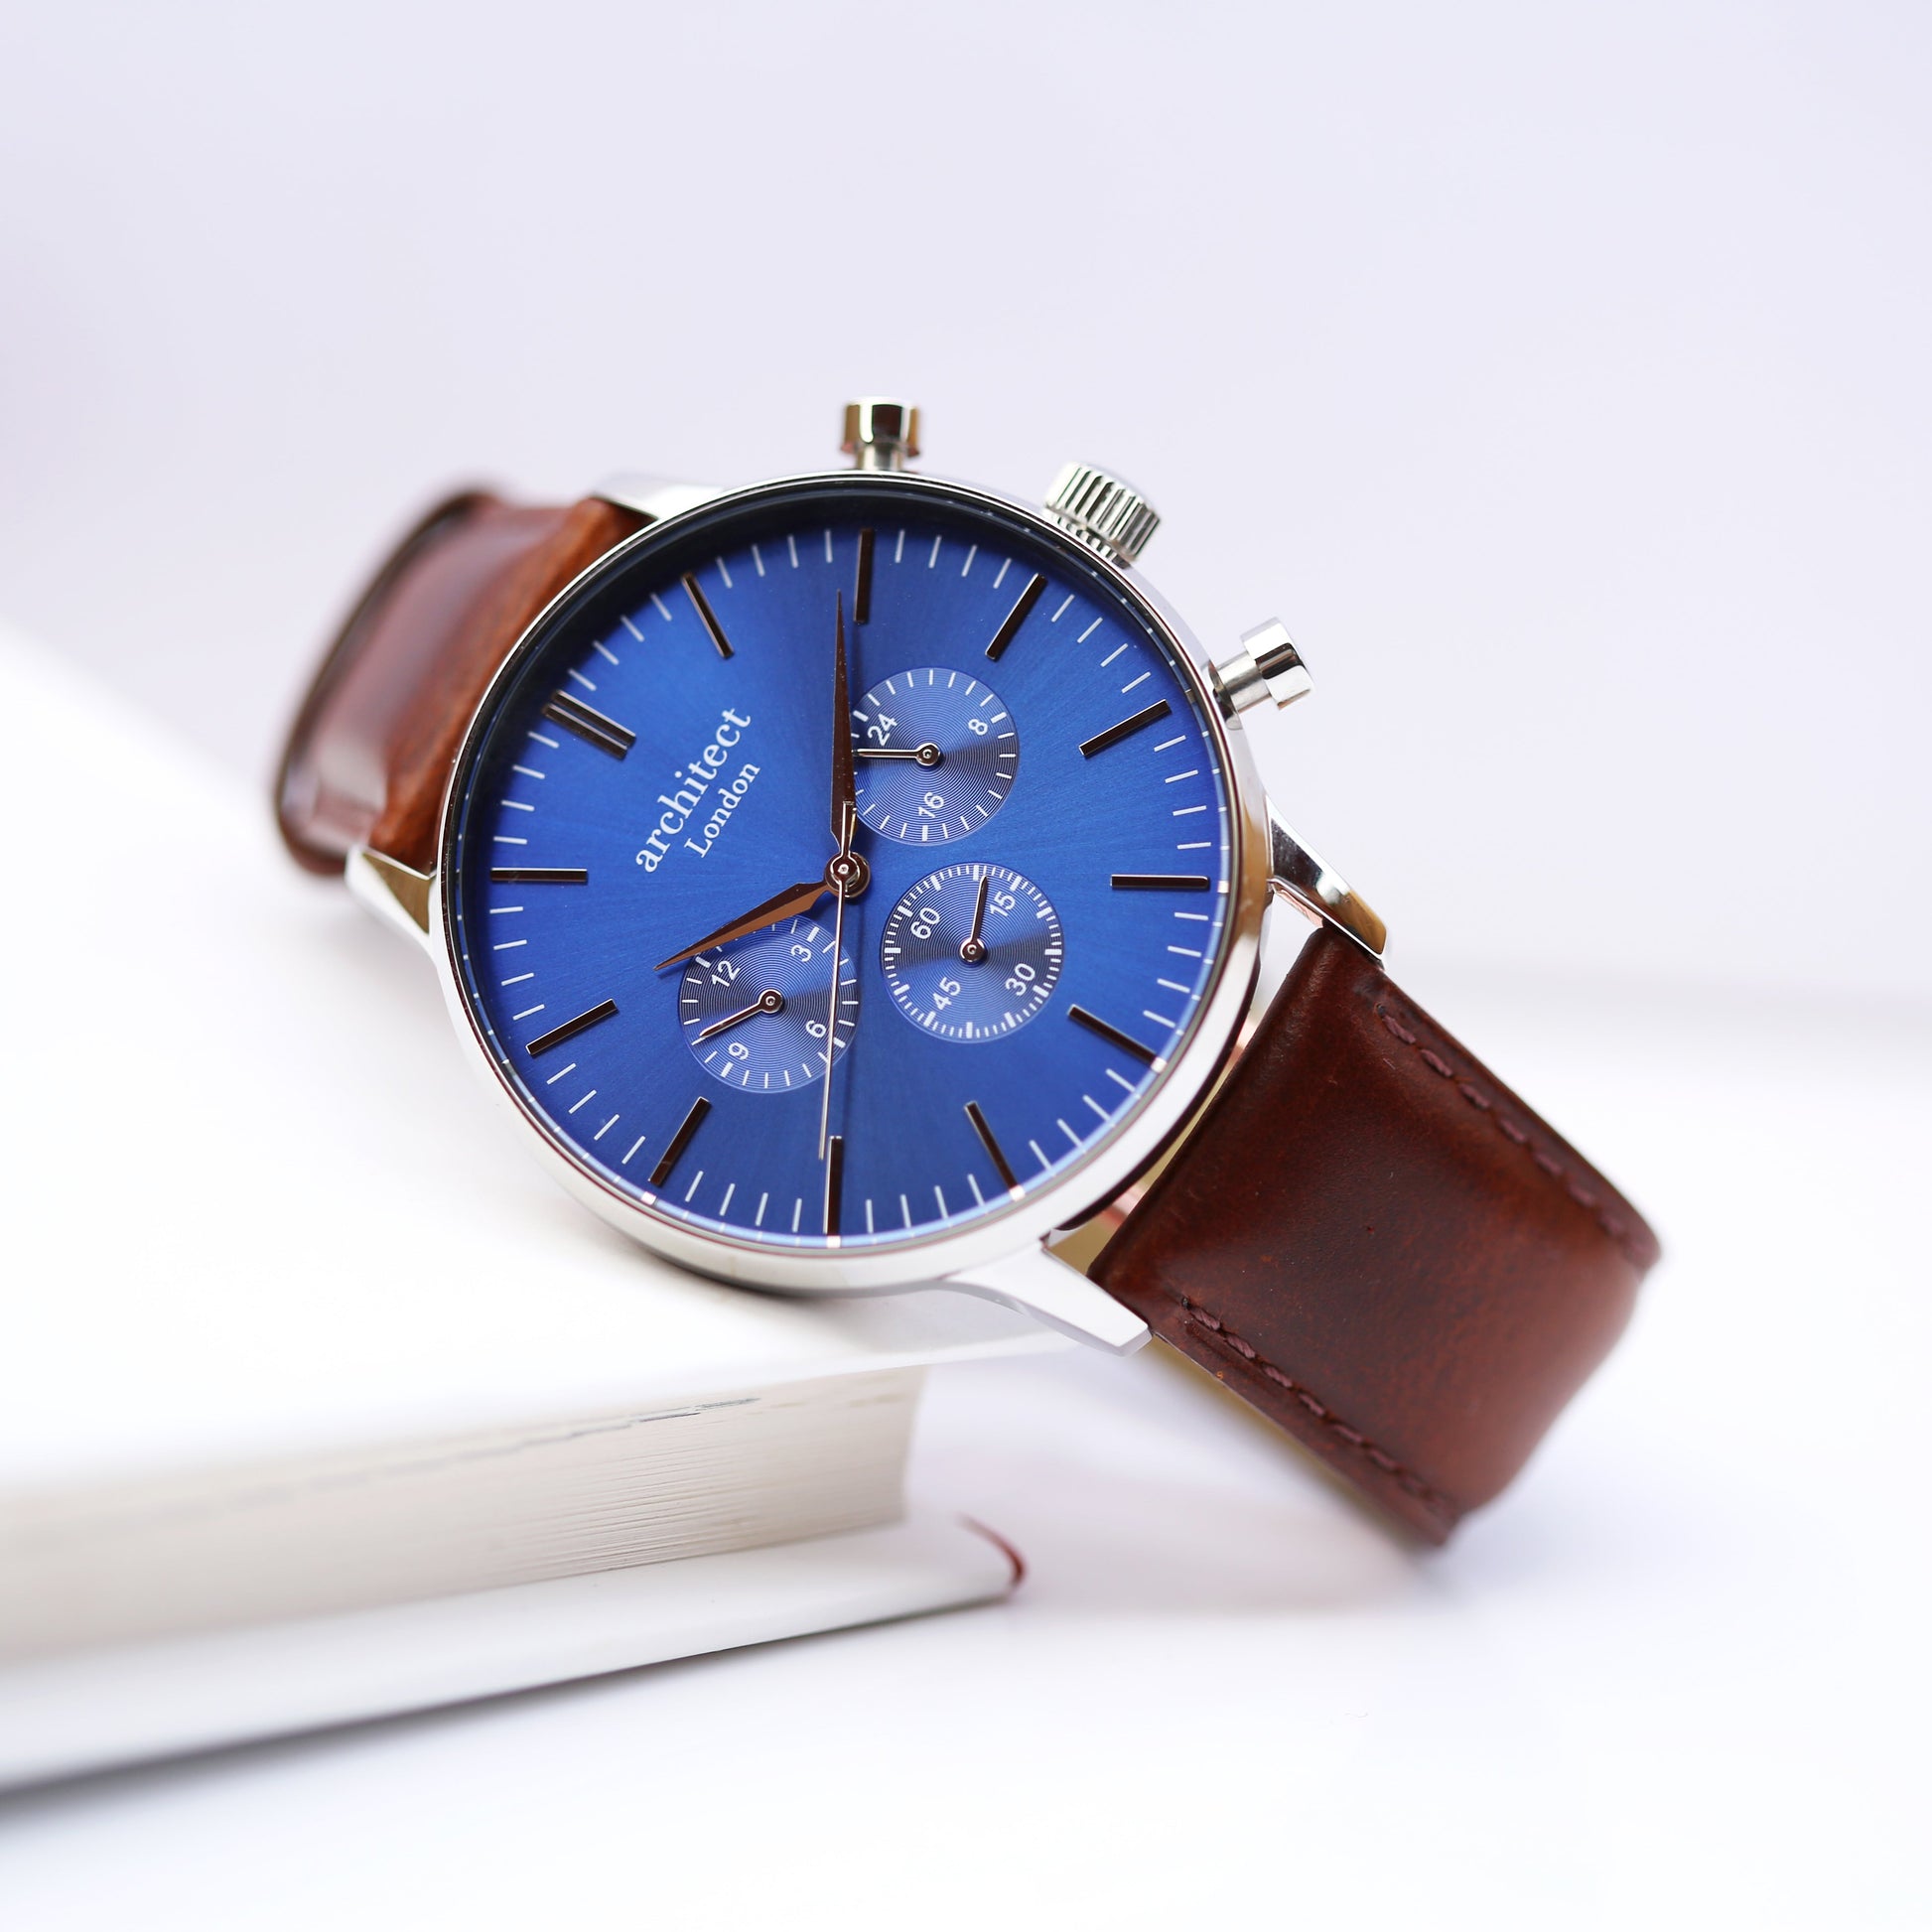 Personalized Men's Watches - Men's Handwriting Engraved Watch - Architect Motivator Blue Face 